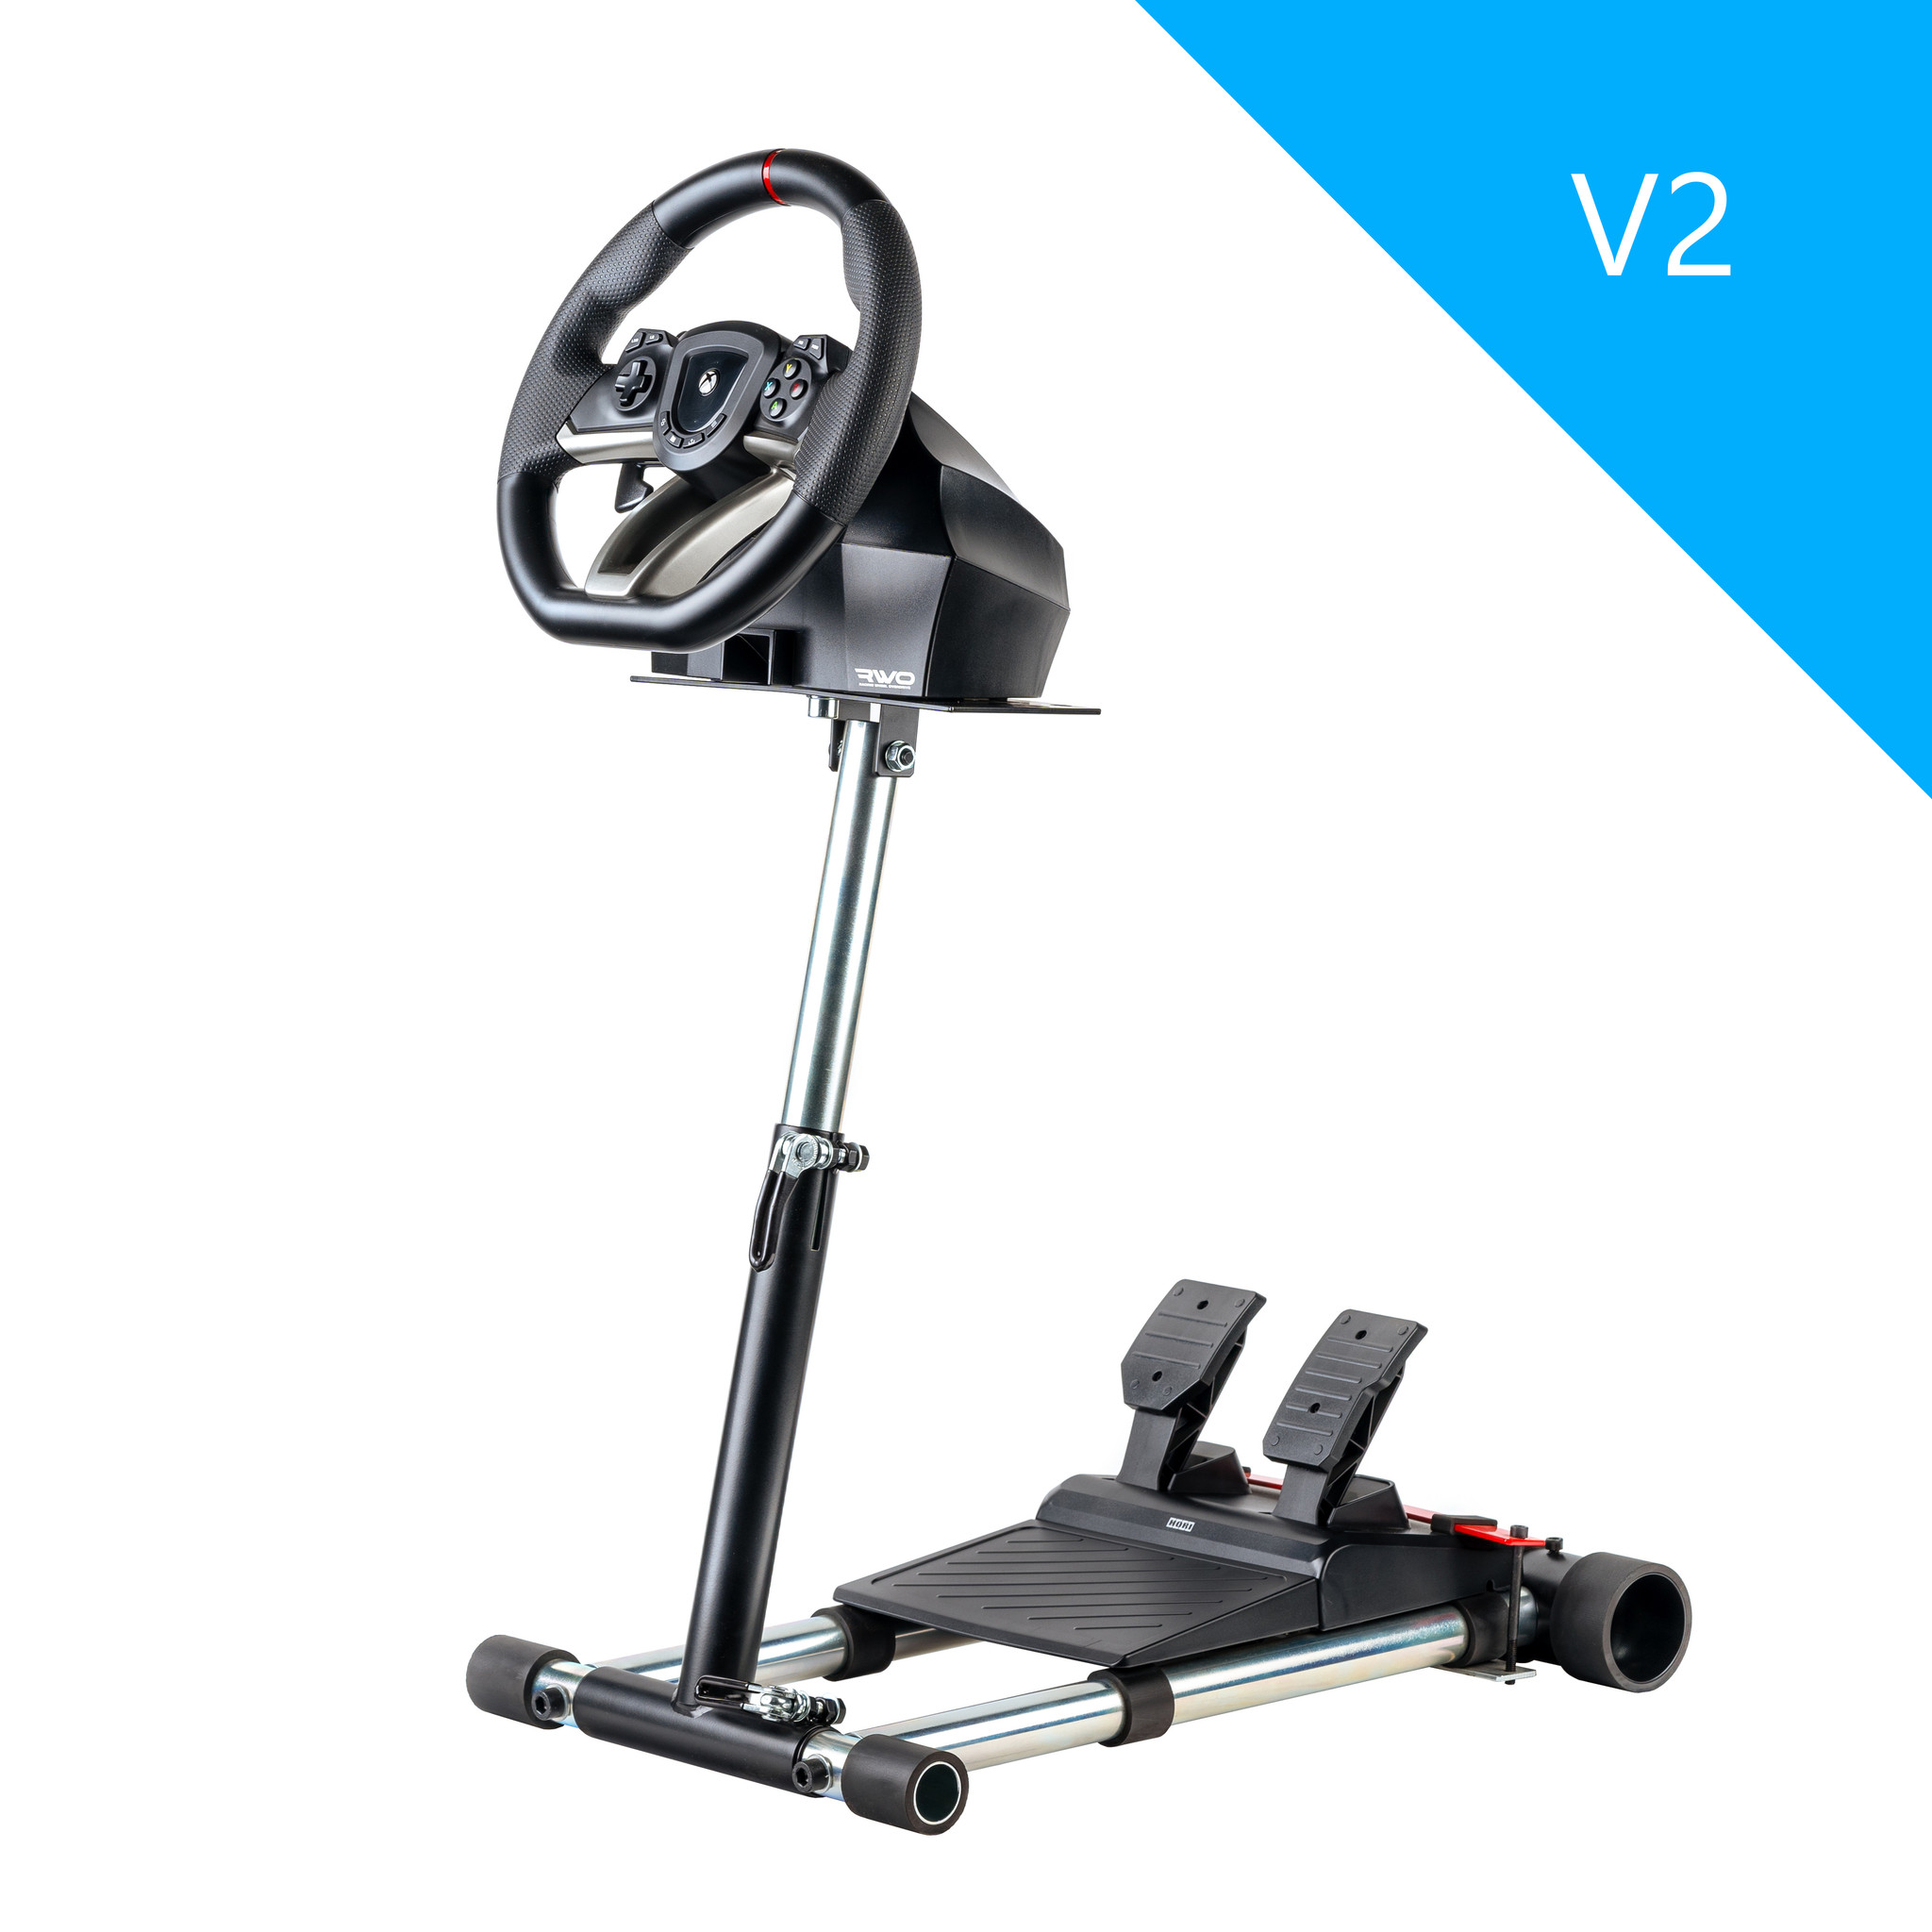 Wheel Stand Pro H Racing Steering Wheel Stand Compatible With Hori Racing  Wheel Overdrive and Wireless APEX Wheels, Original V2. Wheel and Pedals Not